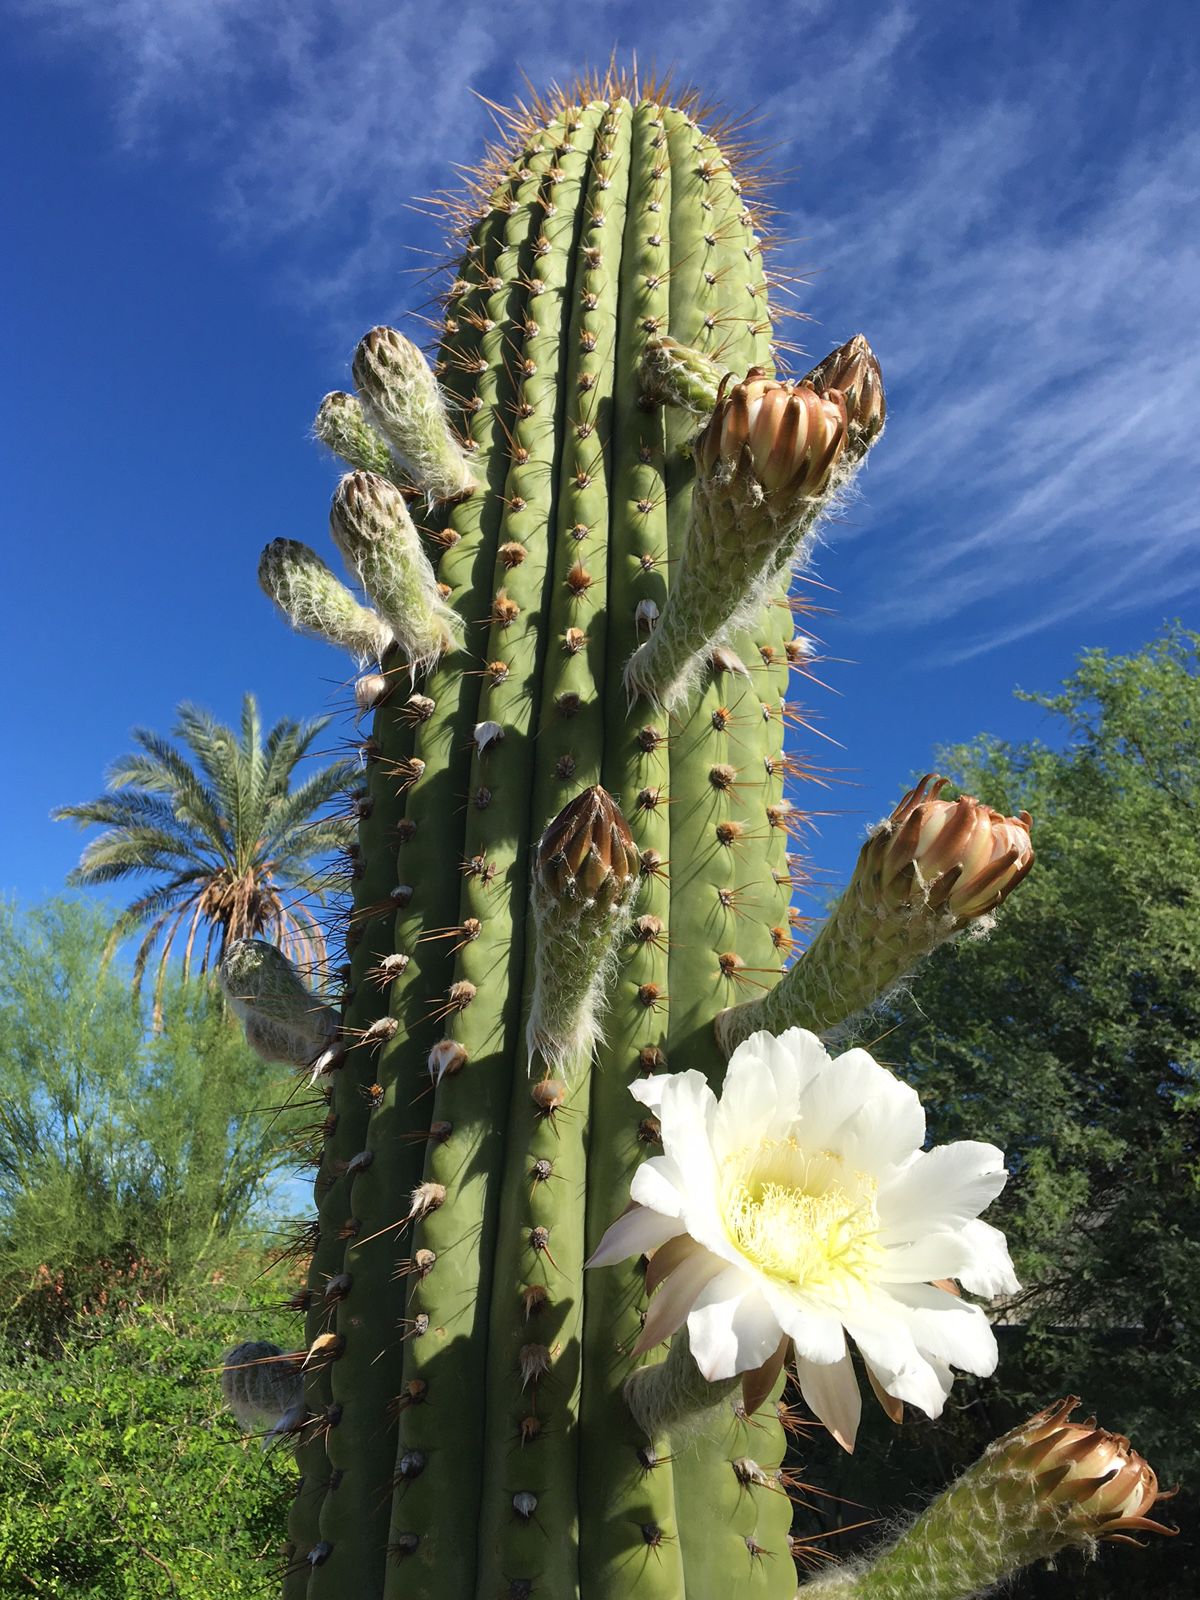 These Photos Of Cactus Blooms Will Make You Fall In Love With Tucson Local News Tucson Com